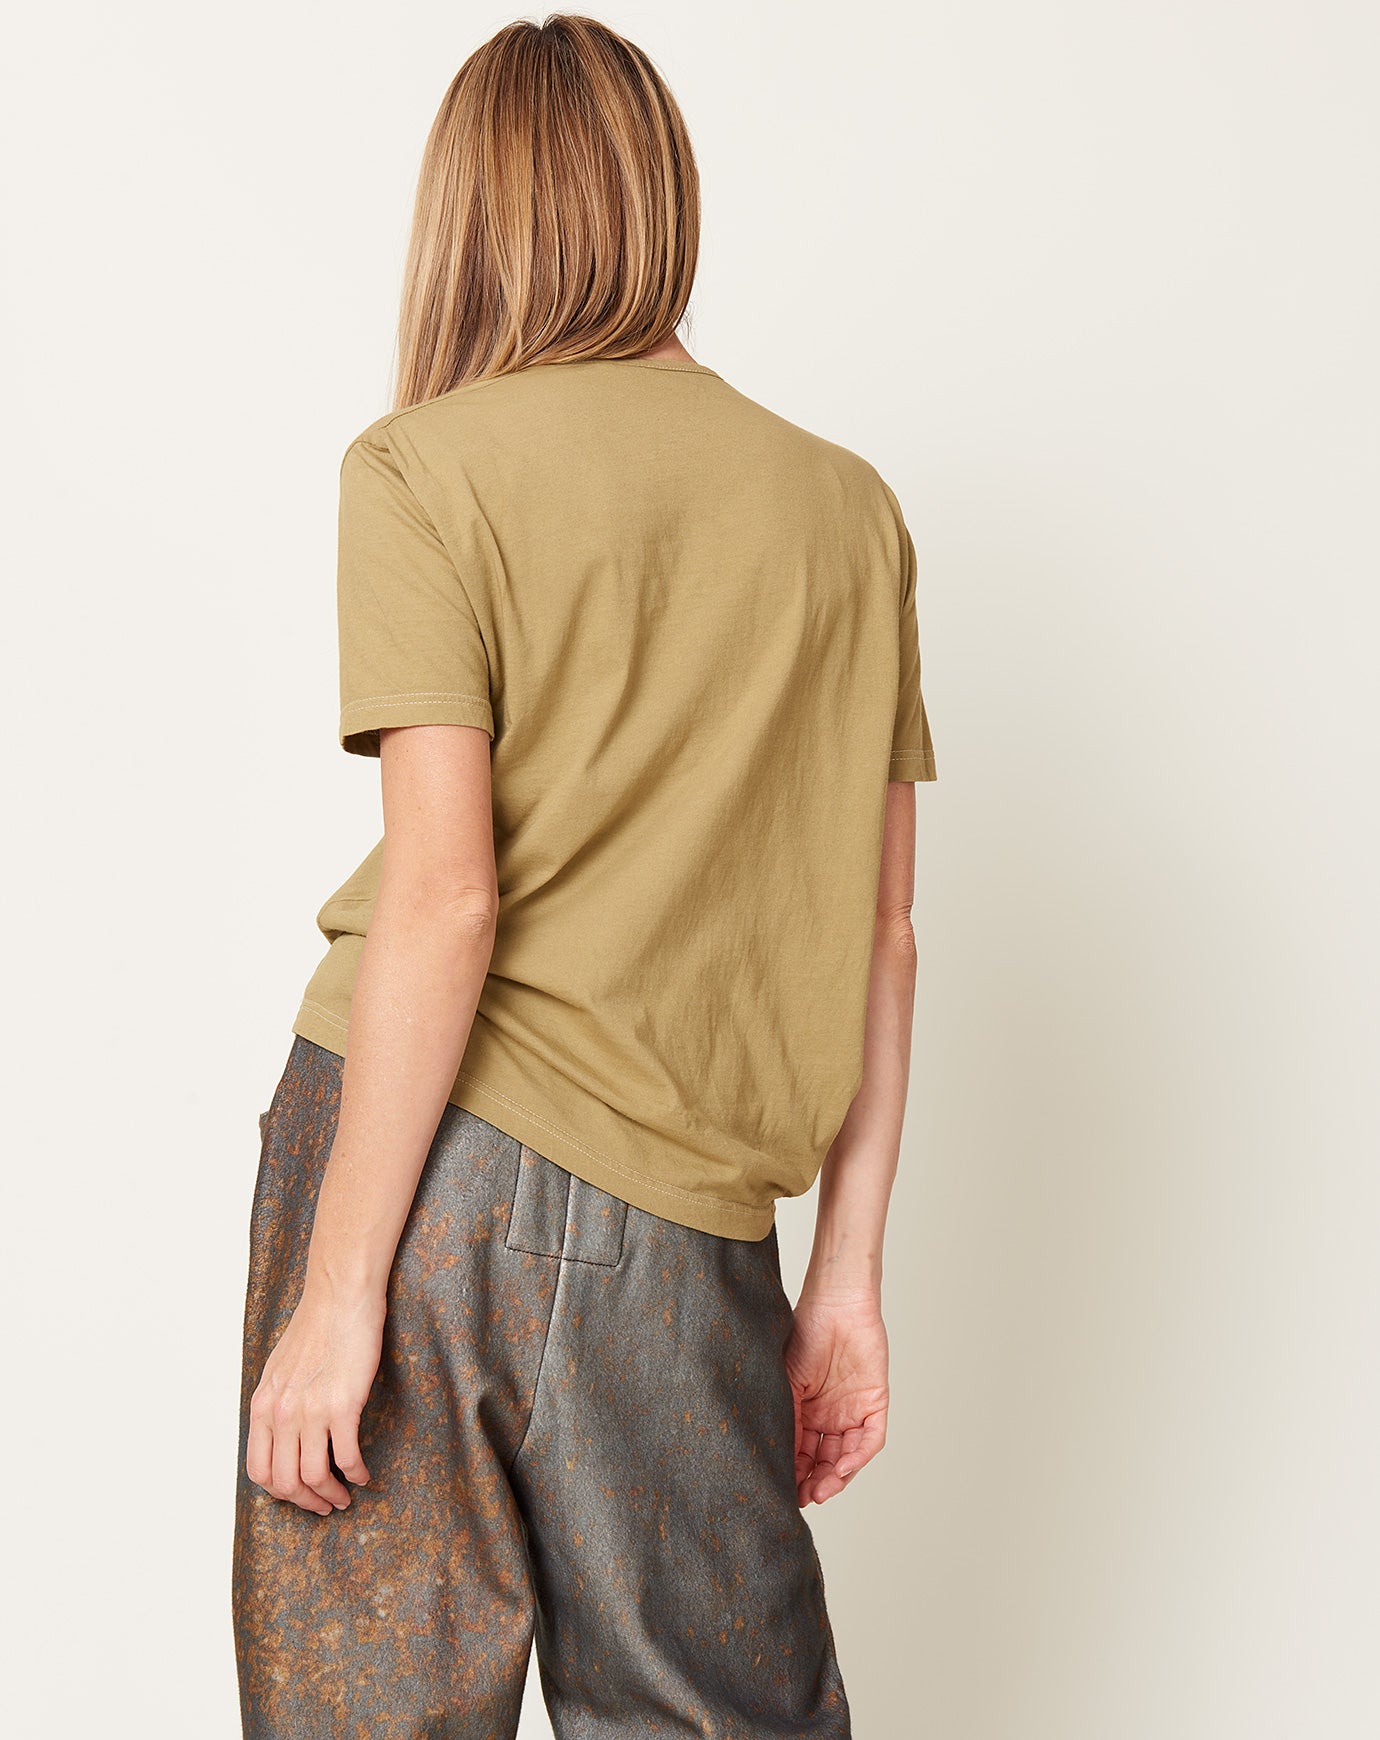 Anntian Edgy T Shirt in Garment Dyed Gold Brown